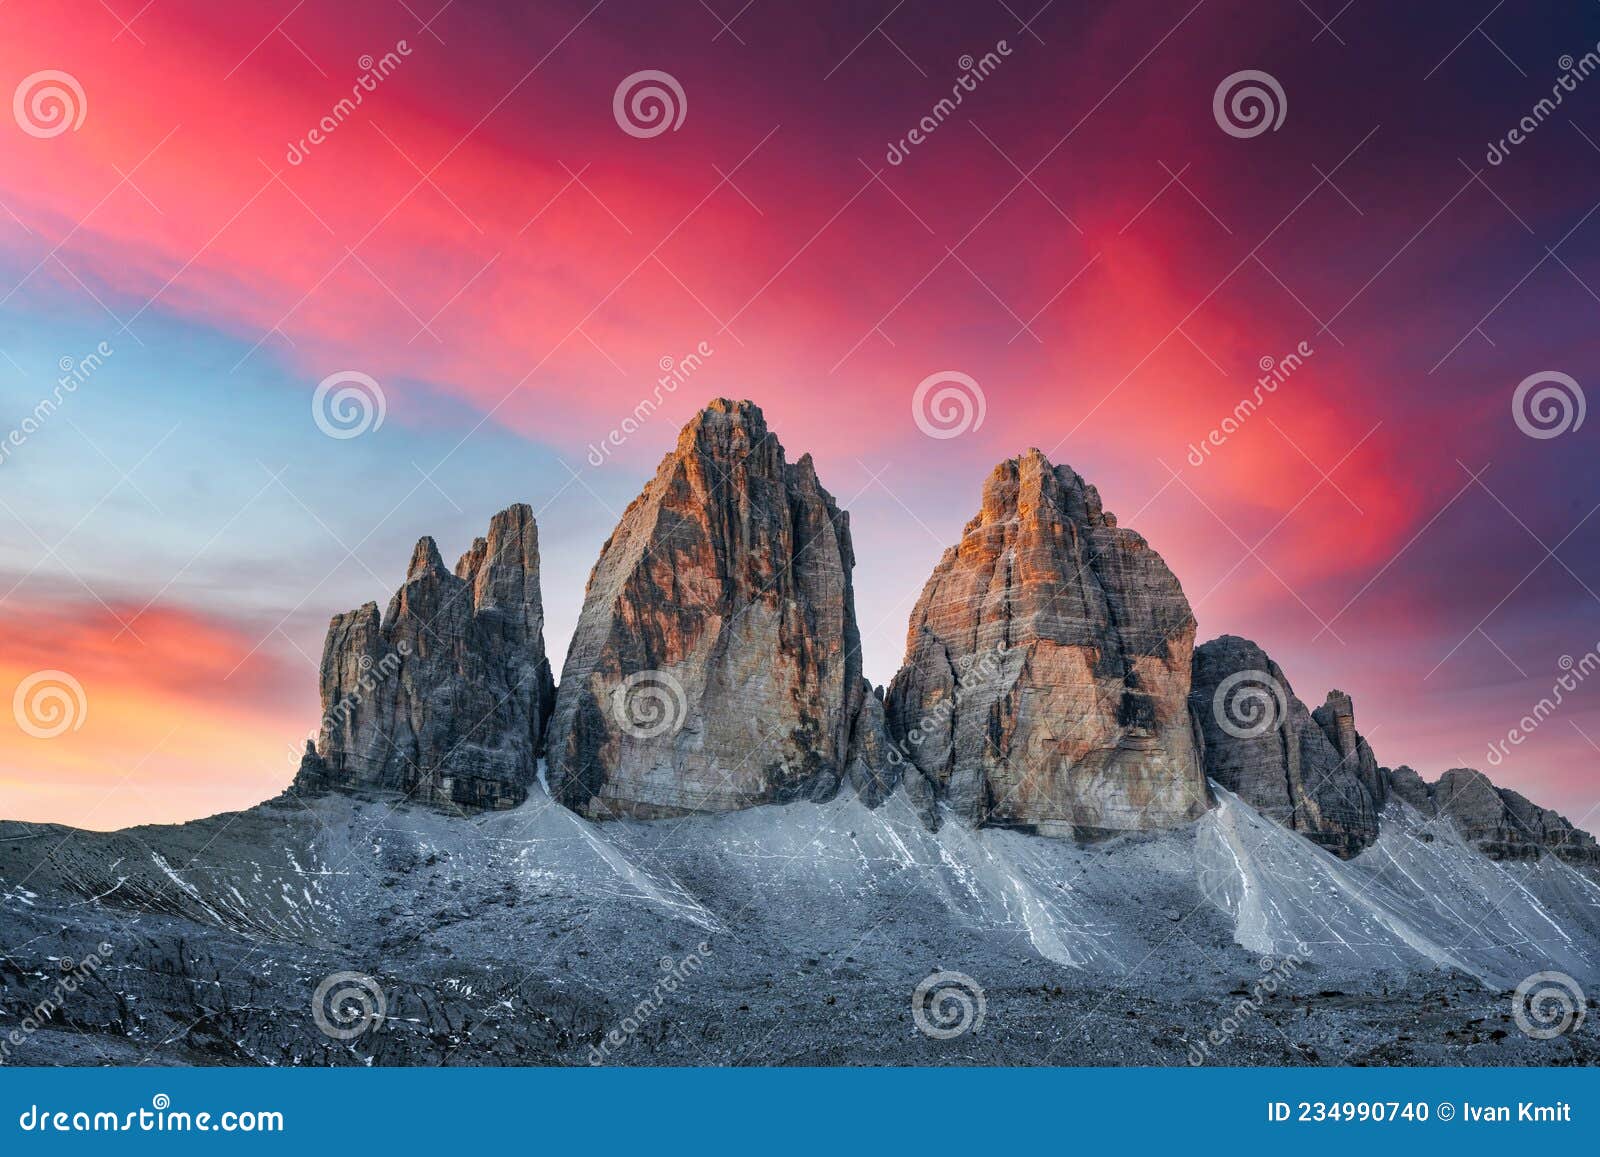 incredible view of the three peaks of lavaredo on sunset time